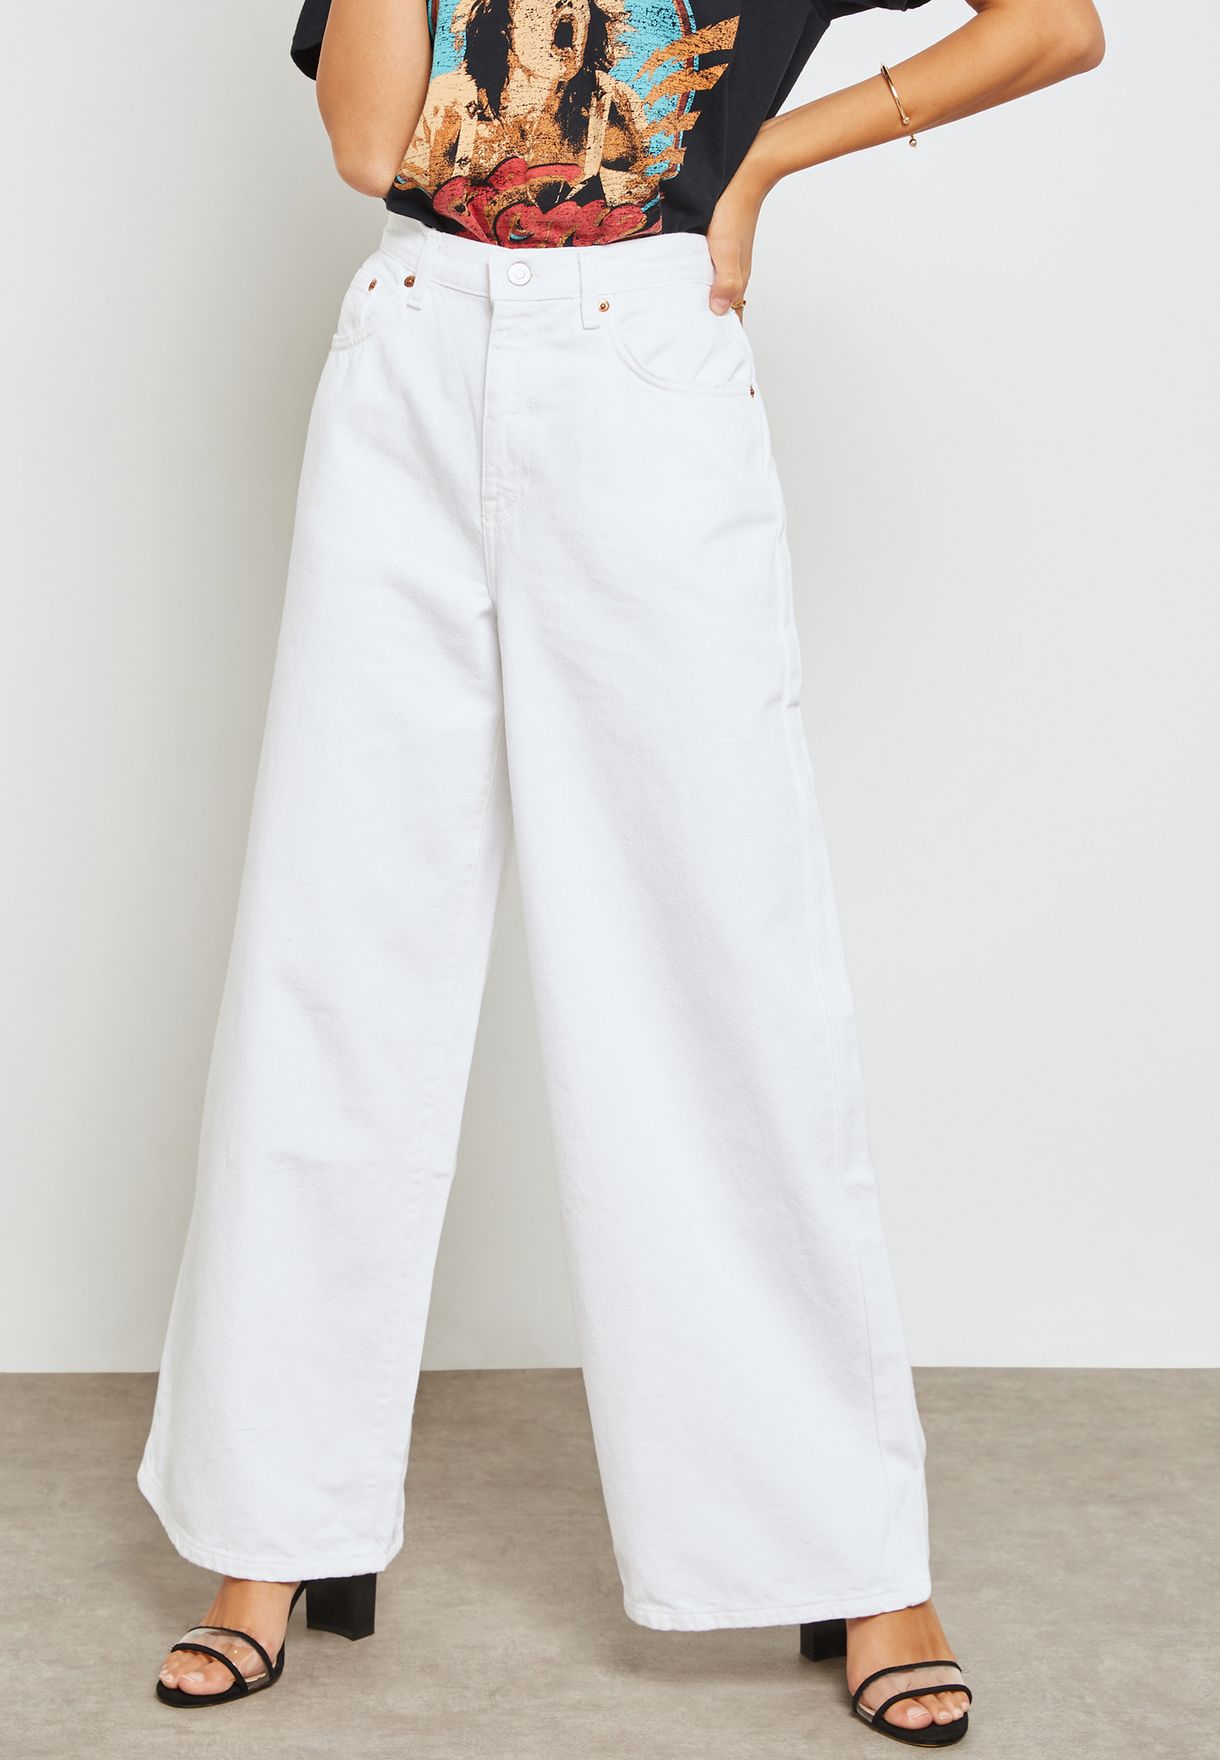 topshop white jeans